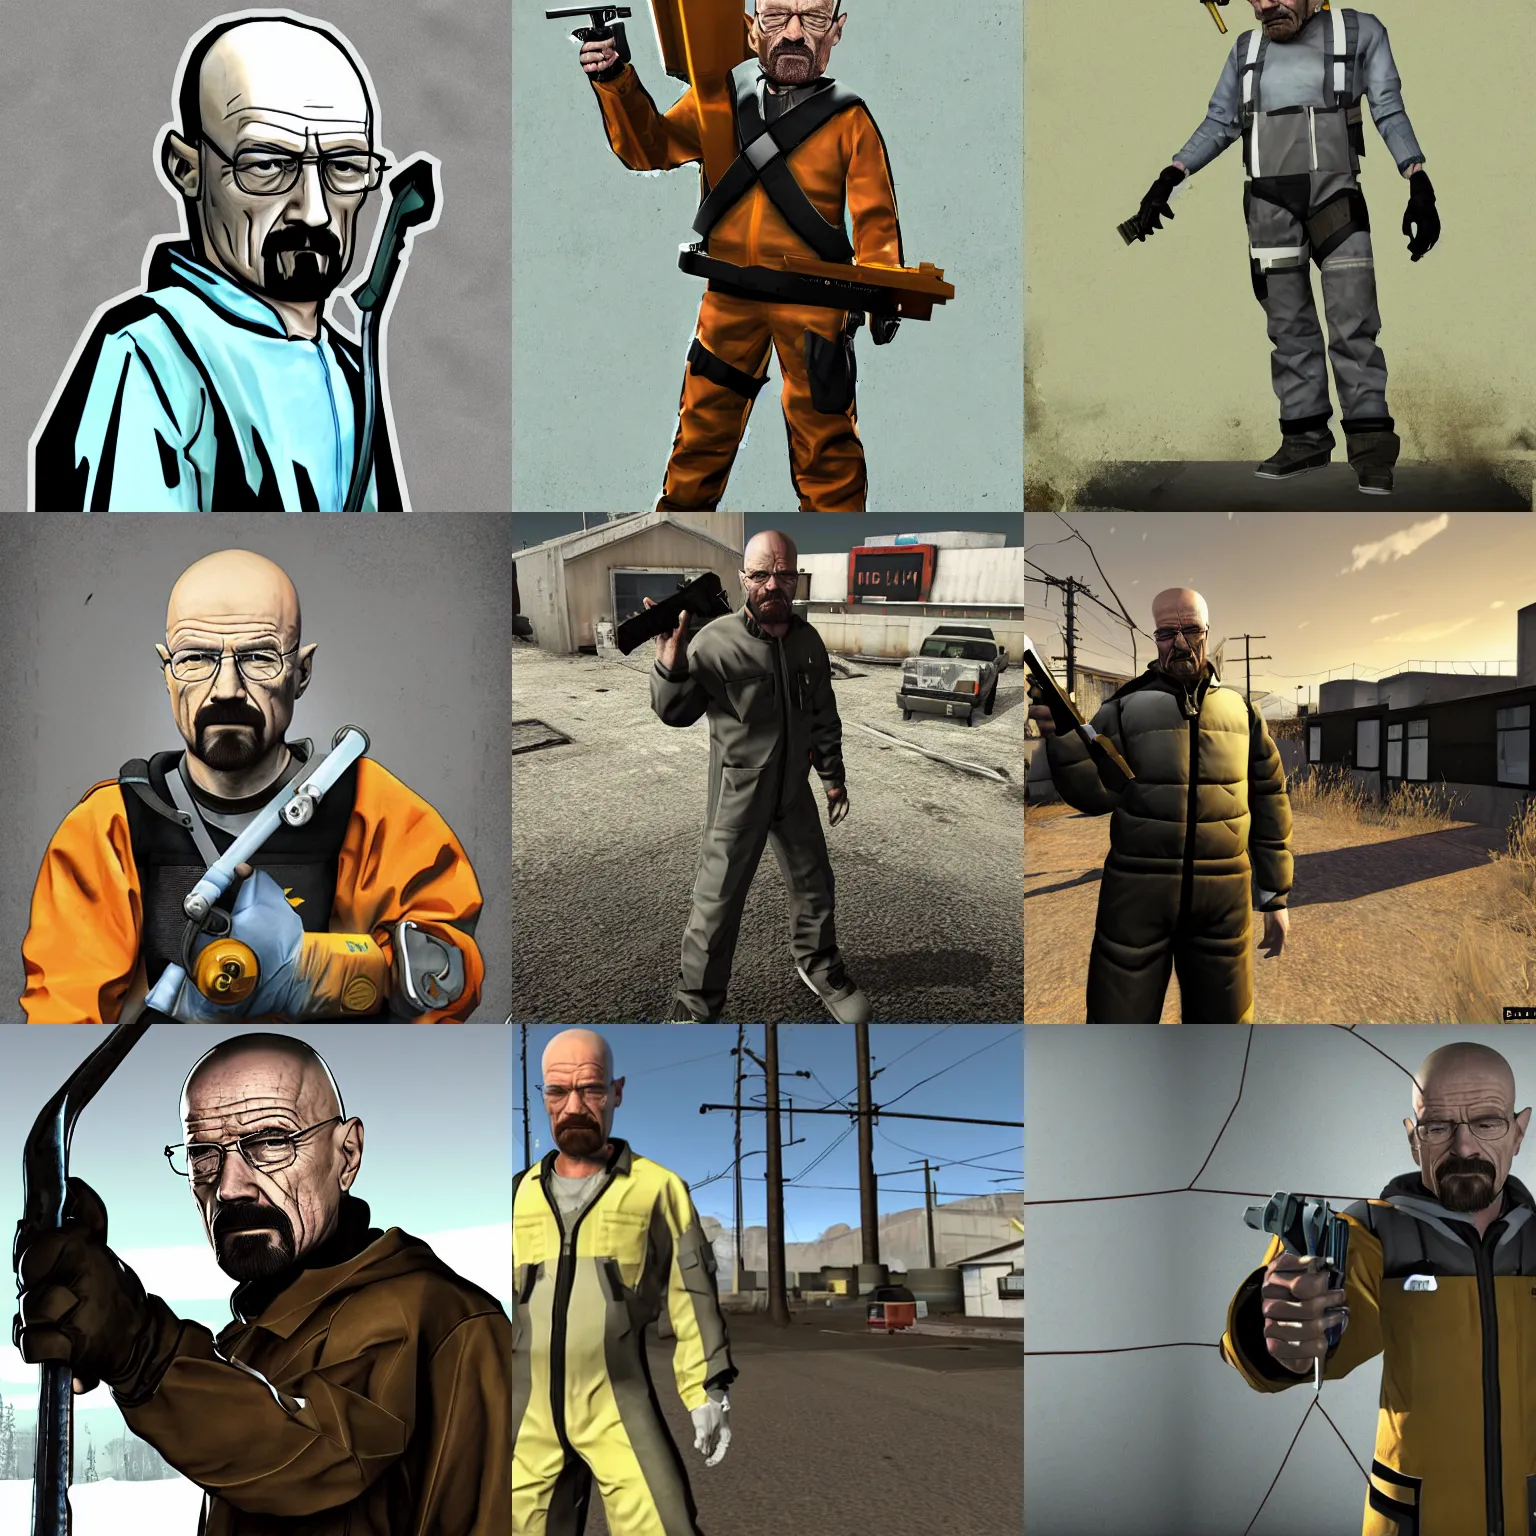 Prompt: Walter white in the style of half life 2, wearing an HEV suit and wielding a crowbar